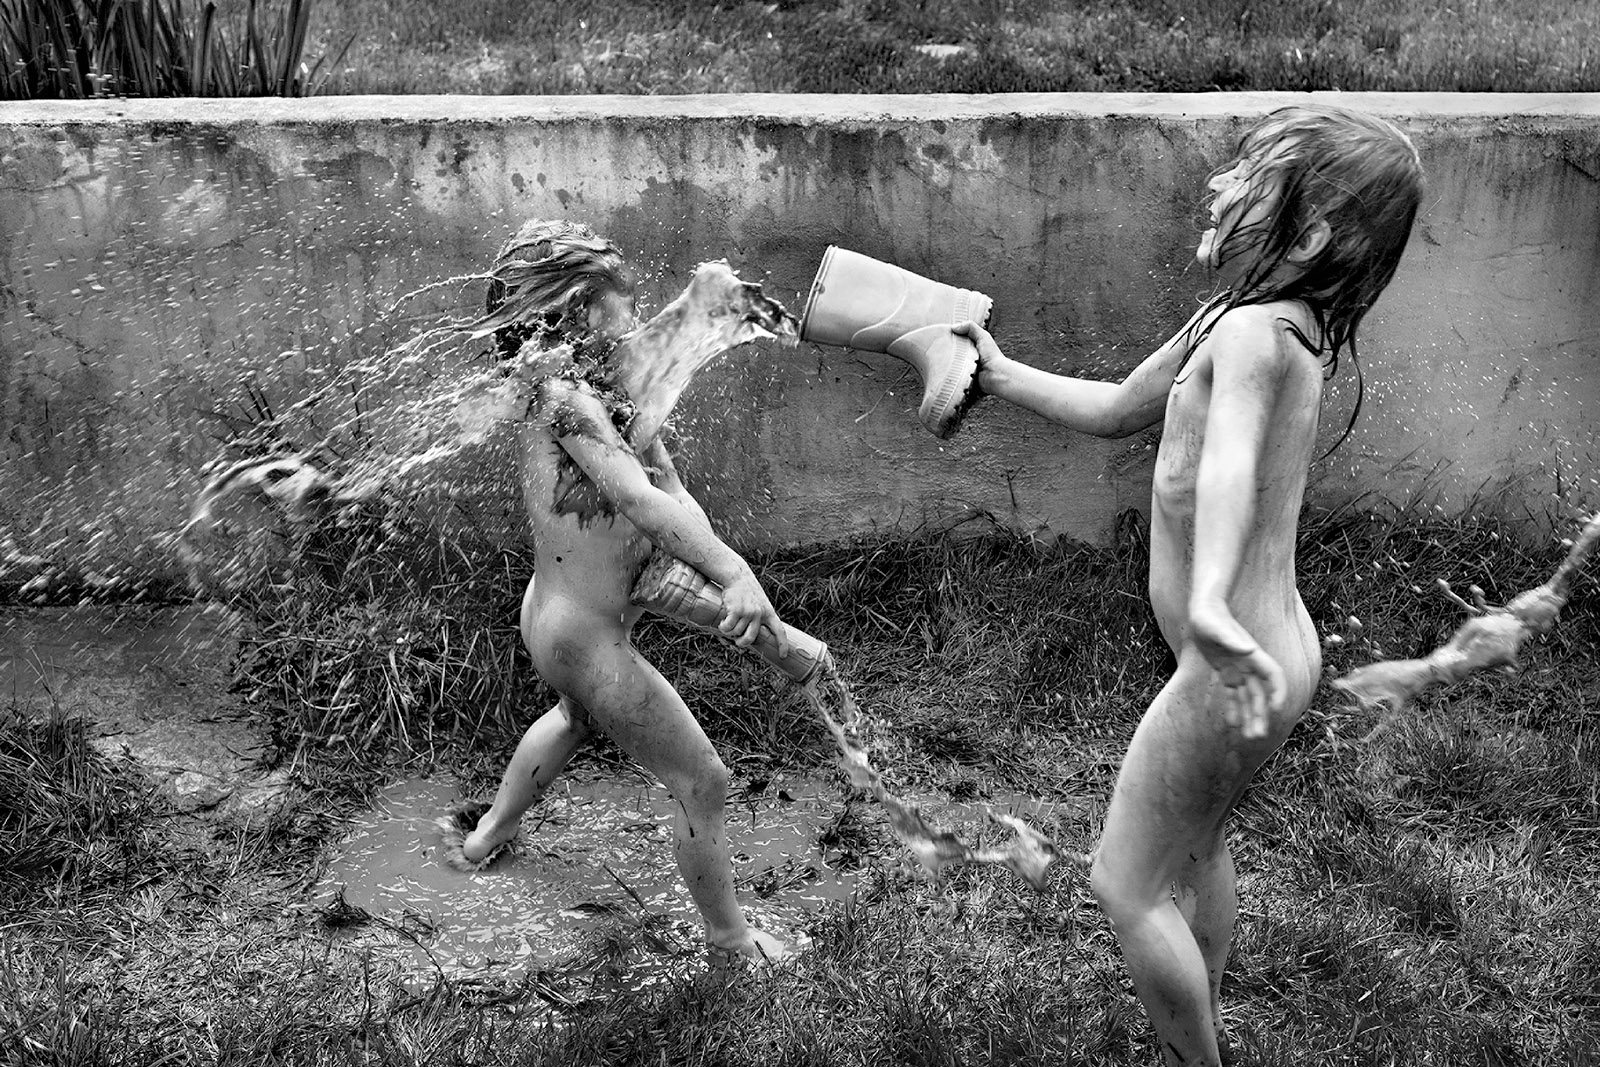 ‘La Famille’; photograph by Alain Laboile from Family Photography Now, a collection of work by forty contemporary photographers. It includes essays by Sophie Howarth and Stephen McLaren, and is published by Thames and Hudson.